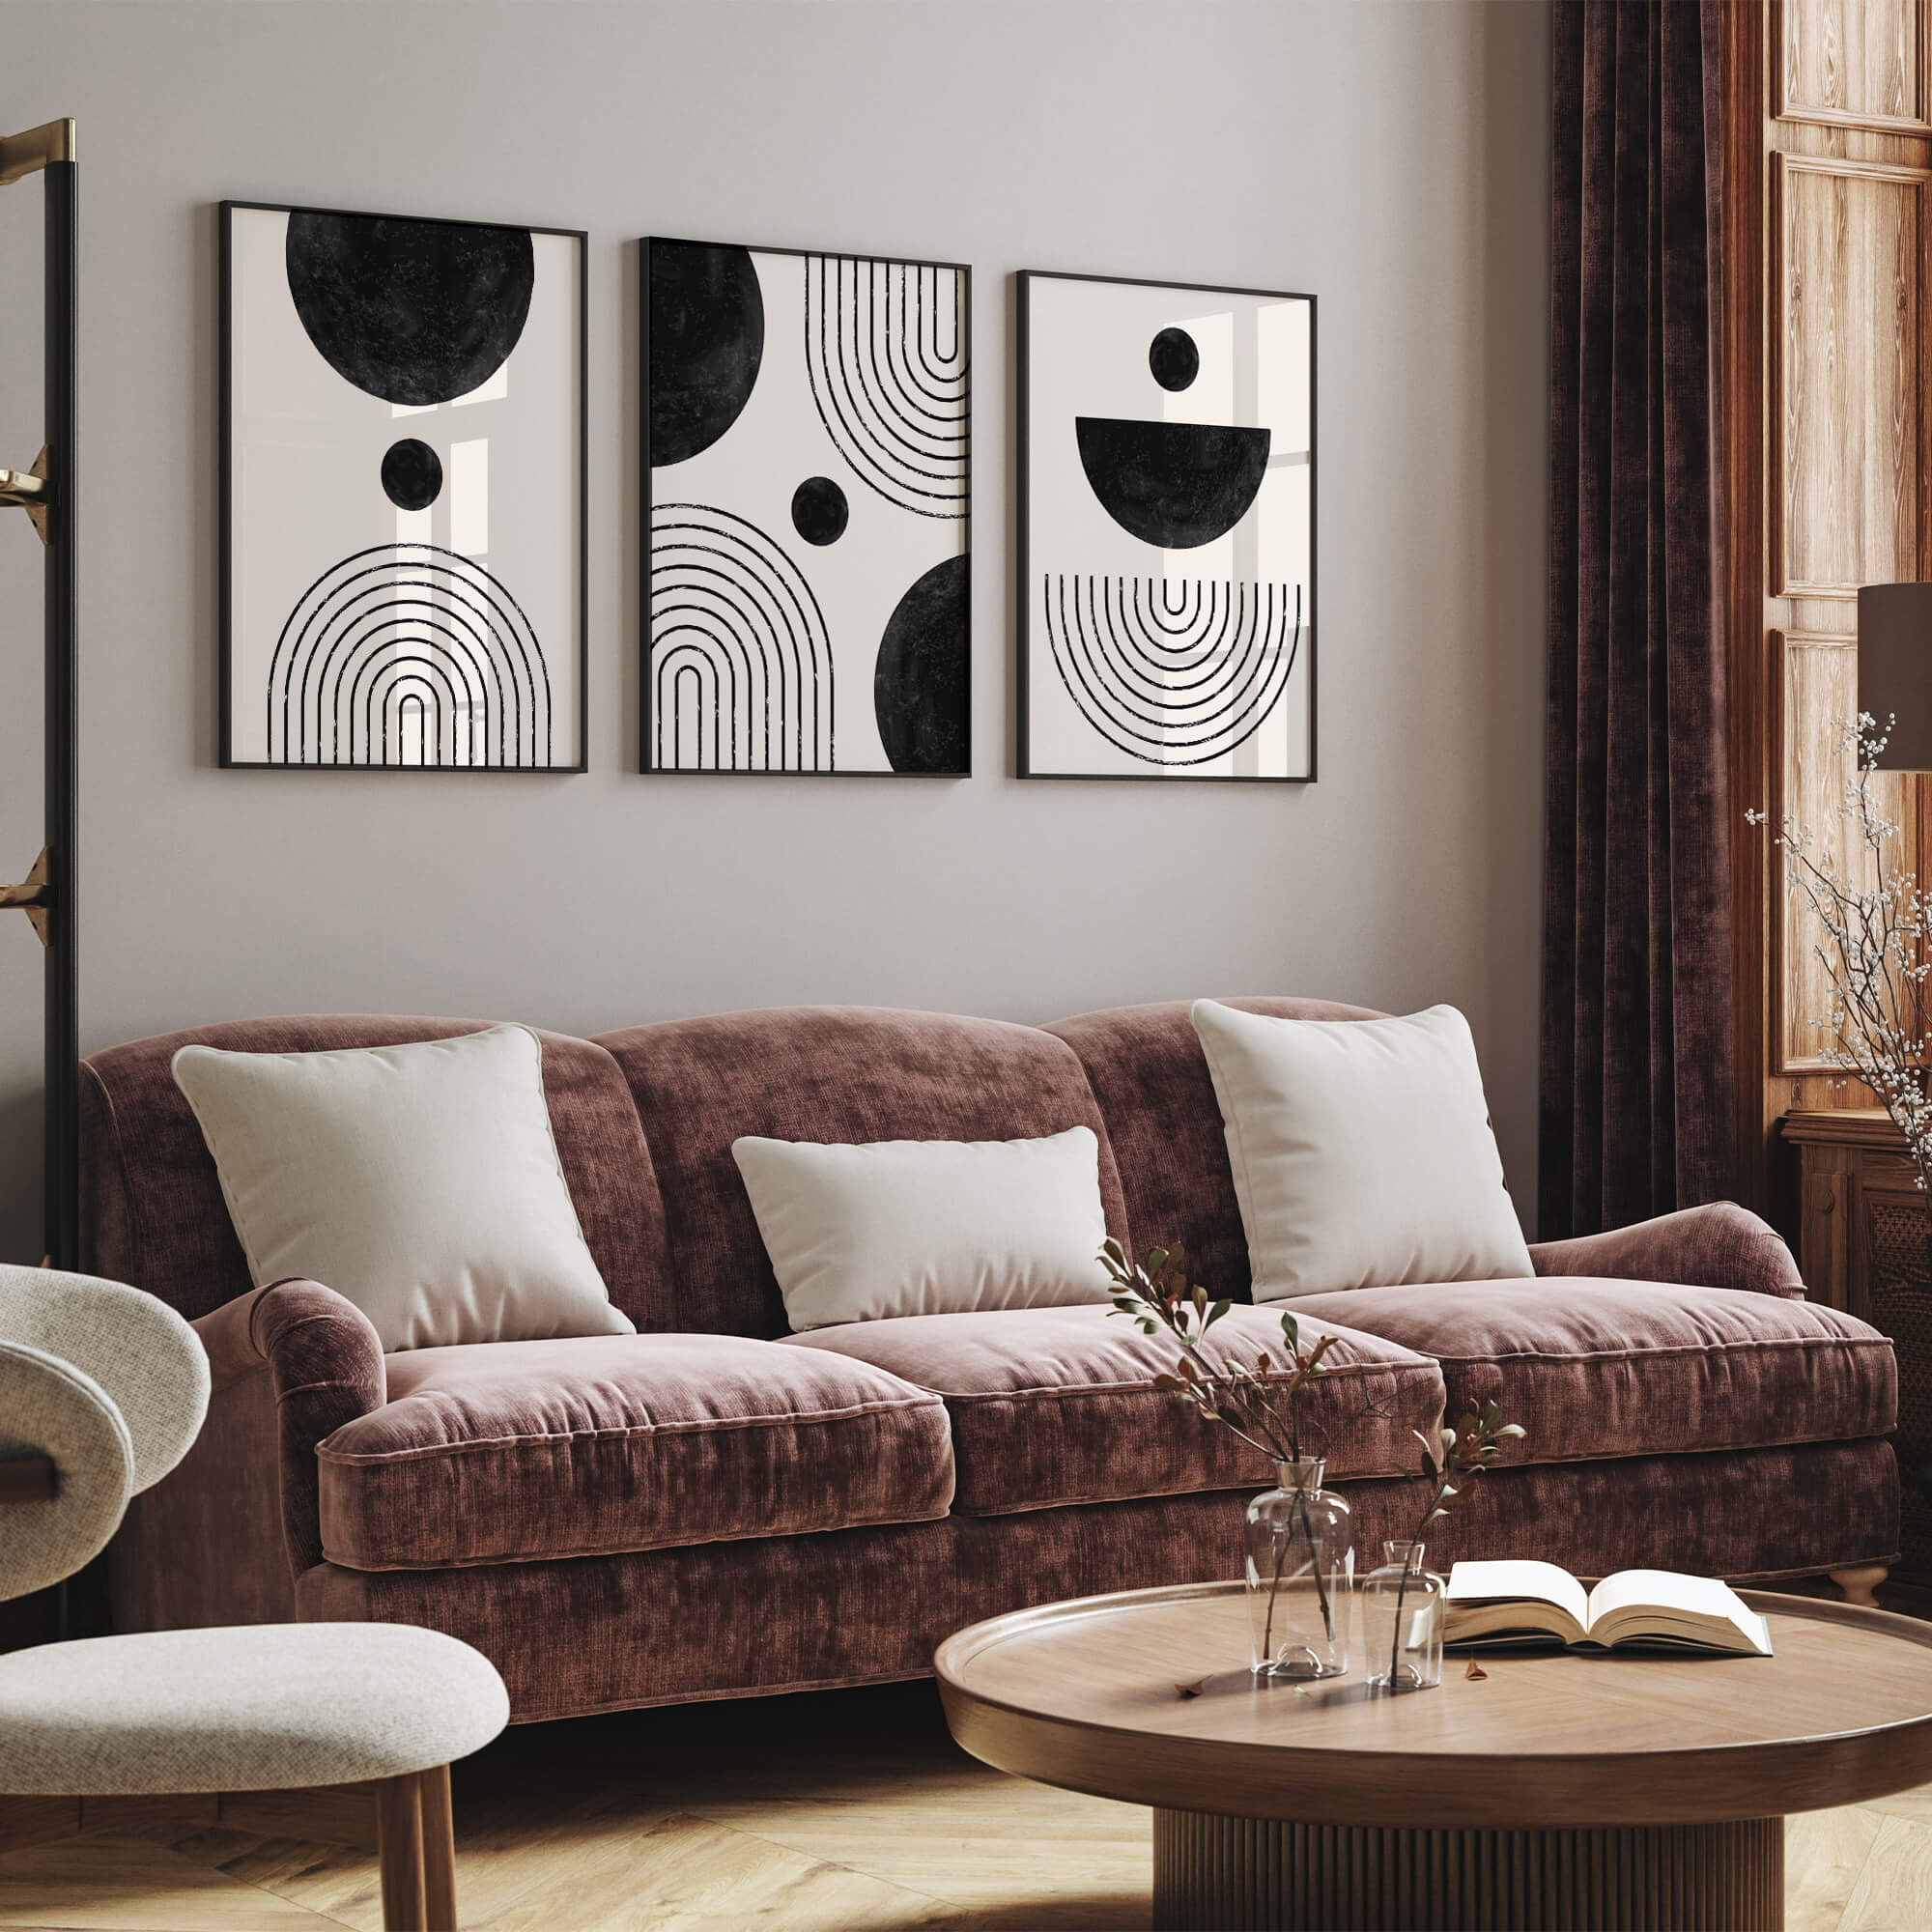 Modern Wall Gallery with 3 posters designed by Postenio creative team. Living room decor ideas 2024.